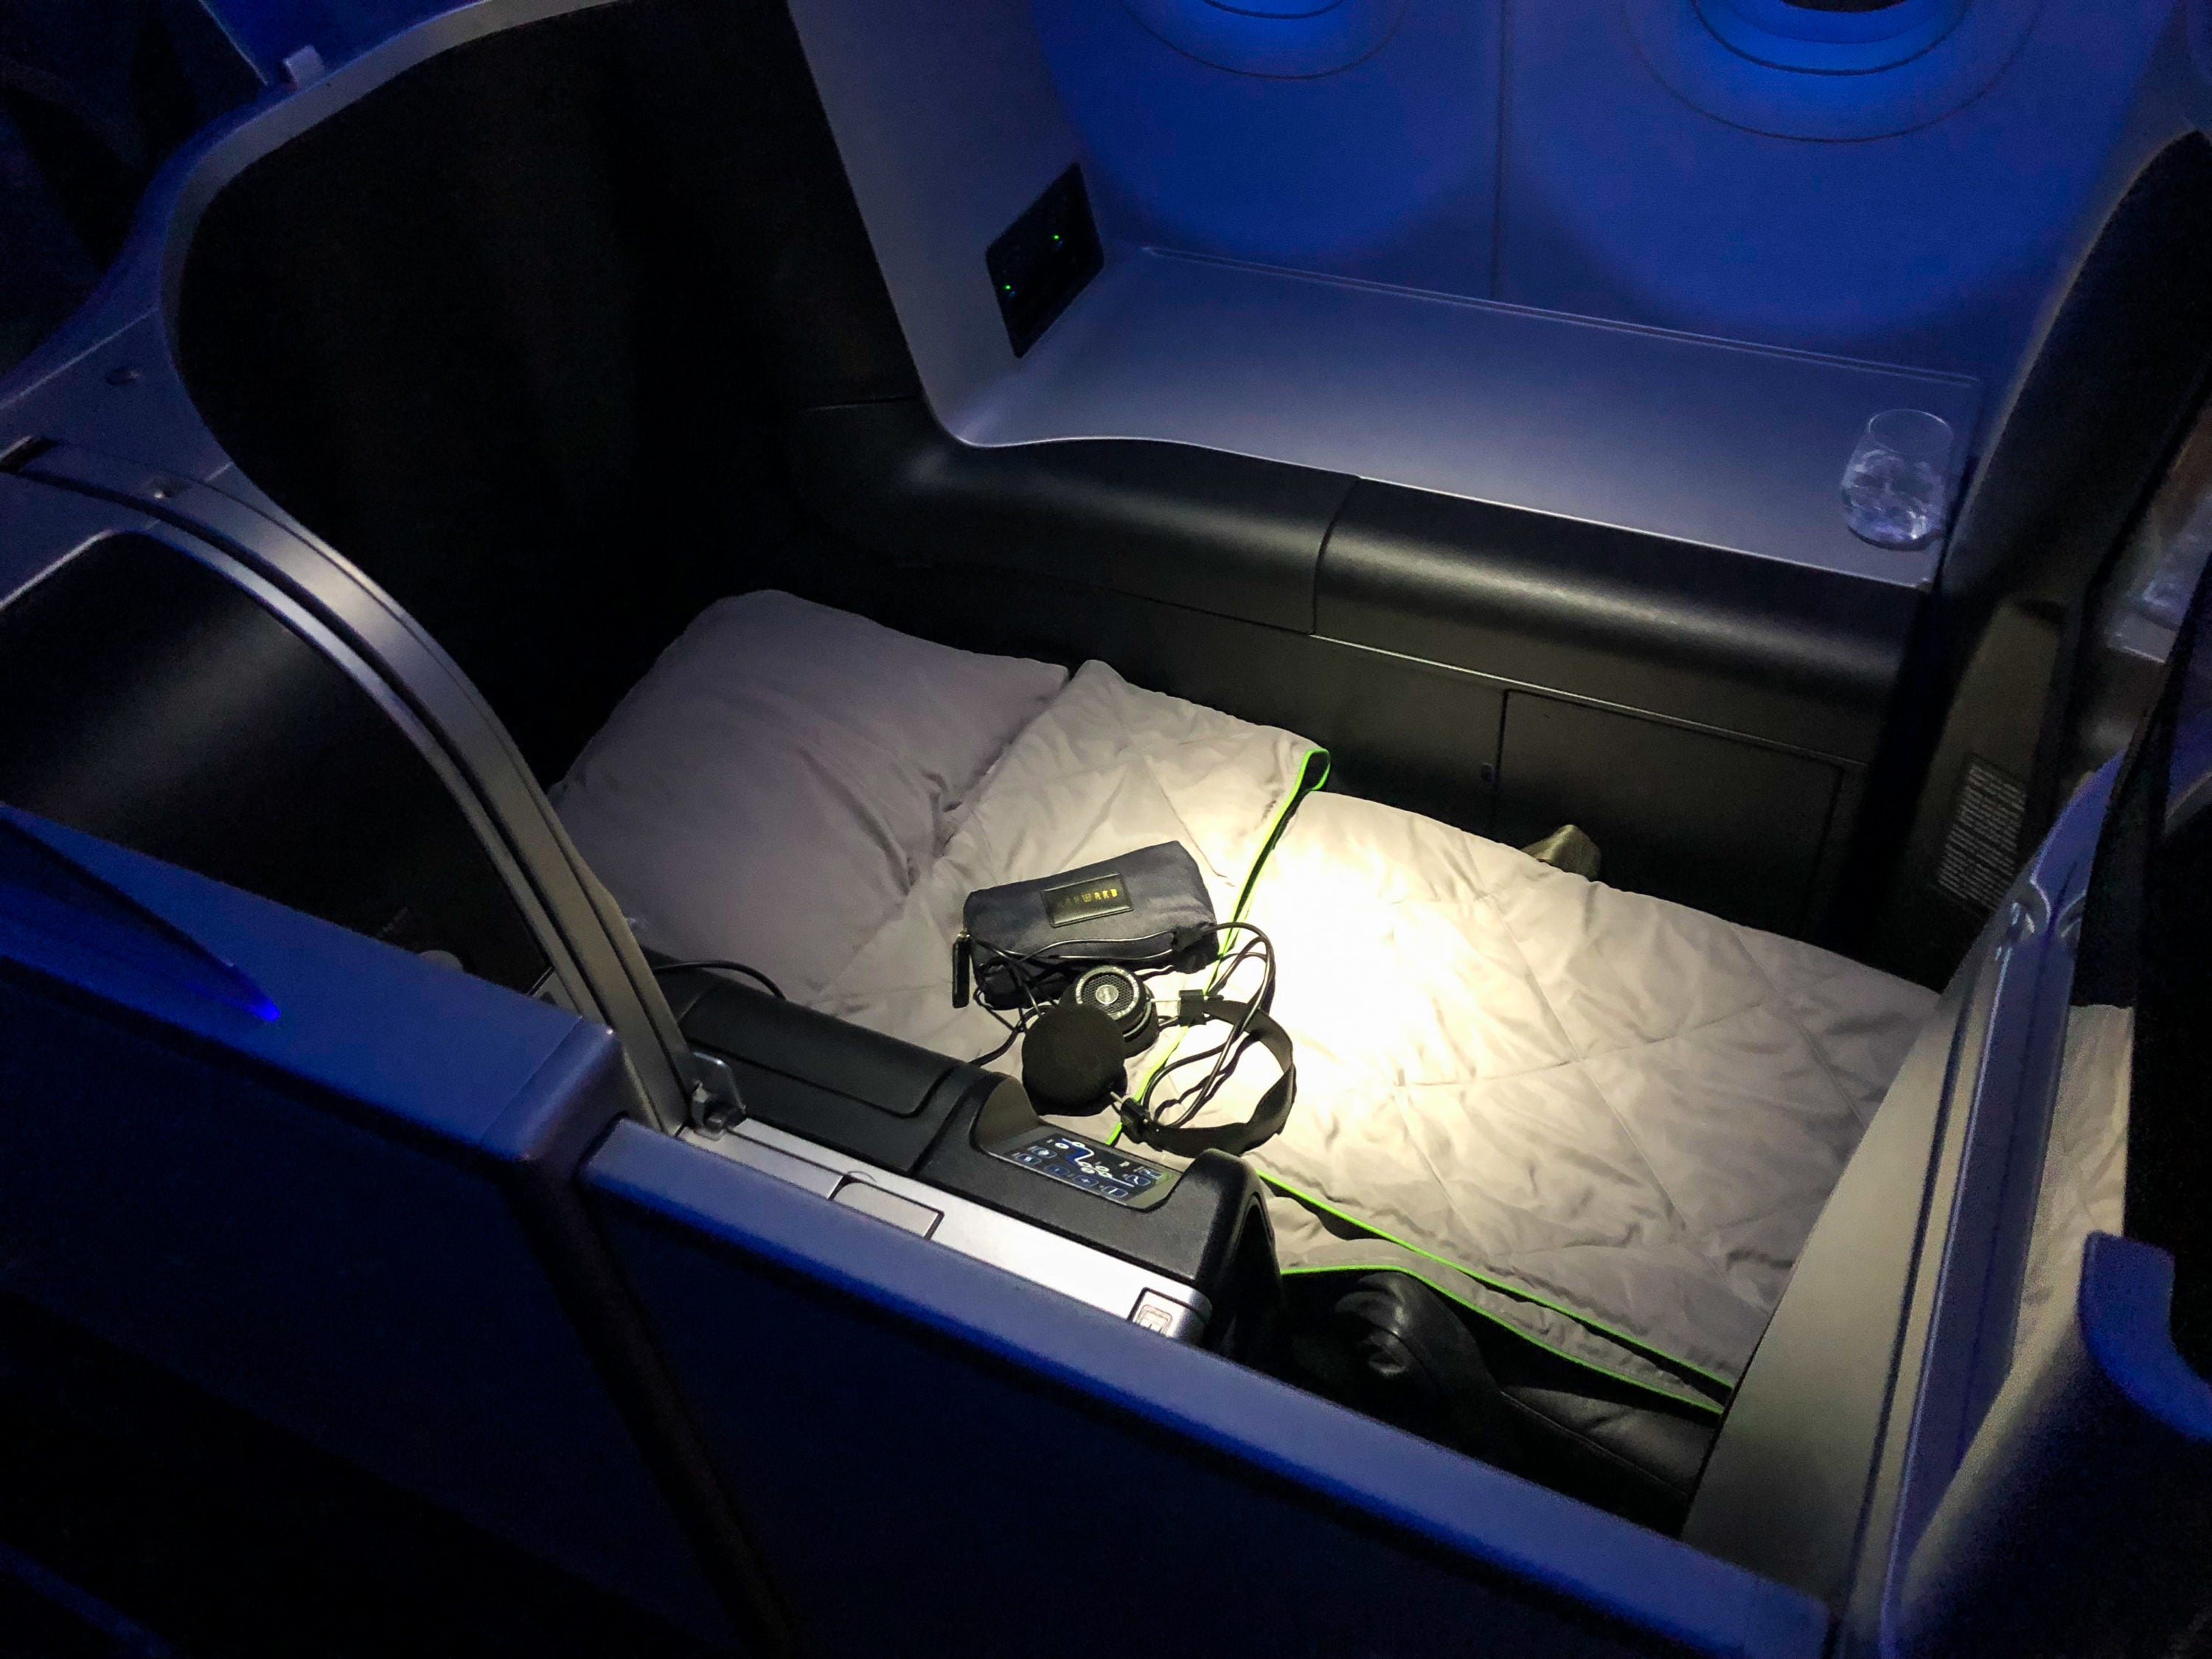 JetBlue Mint A321 bed made with suite door closed